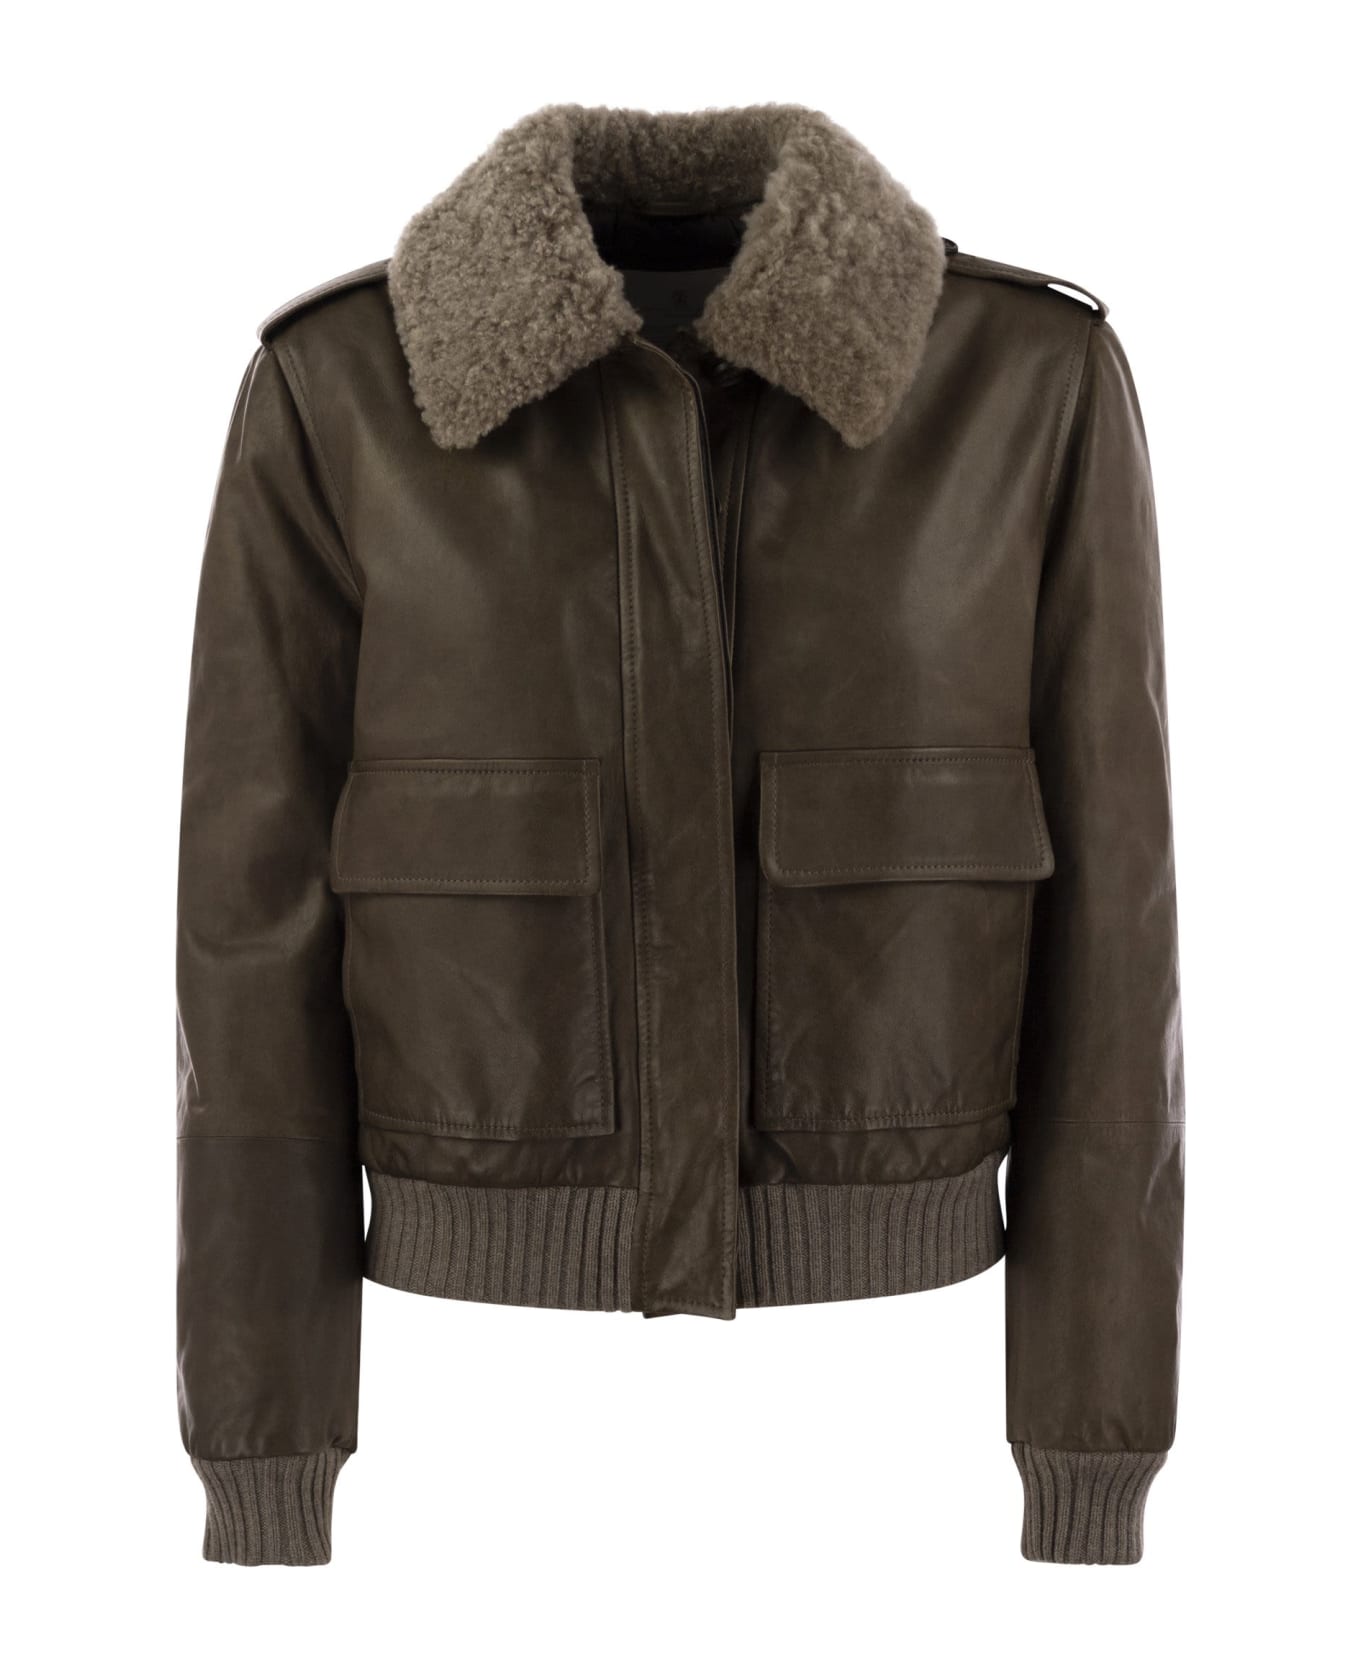 Brunello Cucinelli Leather Bomber Jacket And Shearling Collar - Brown